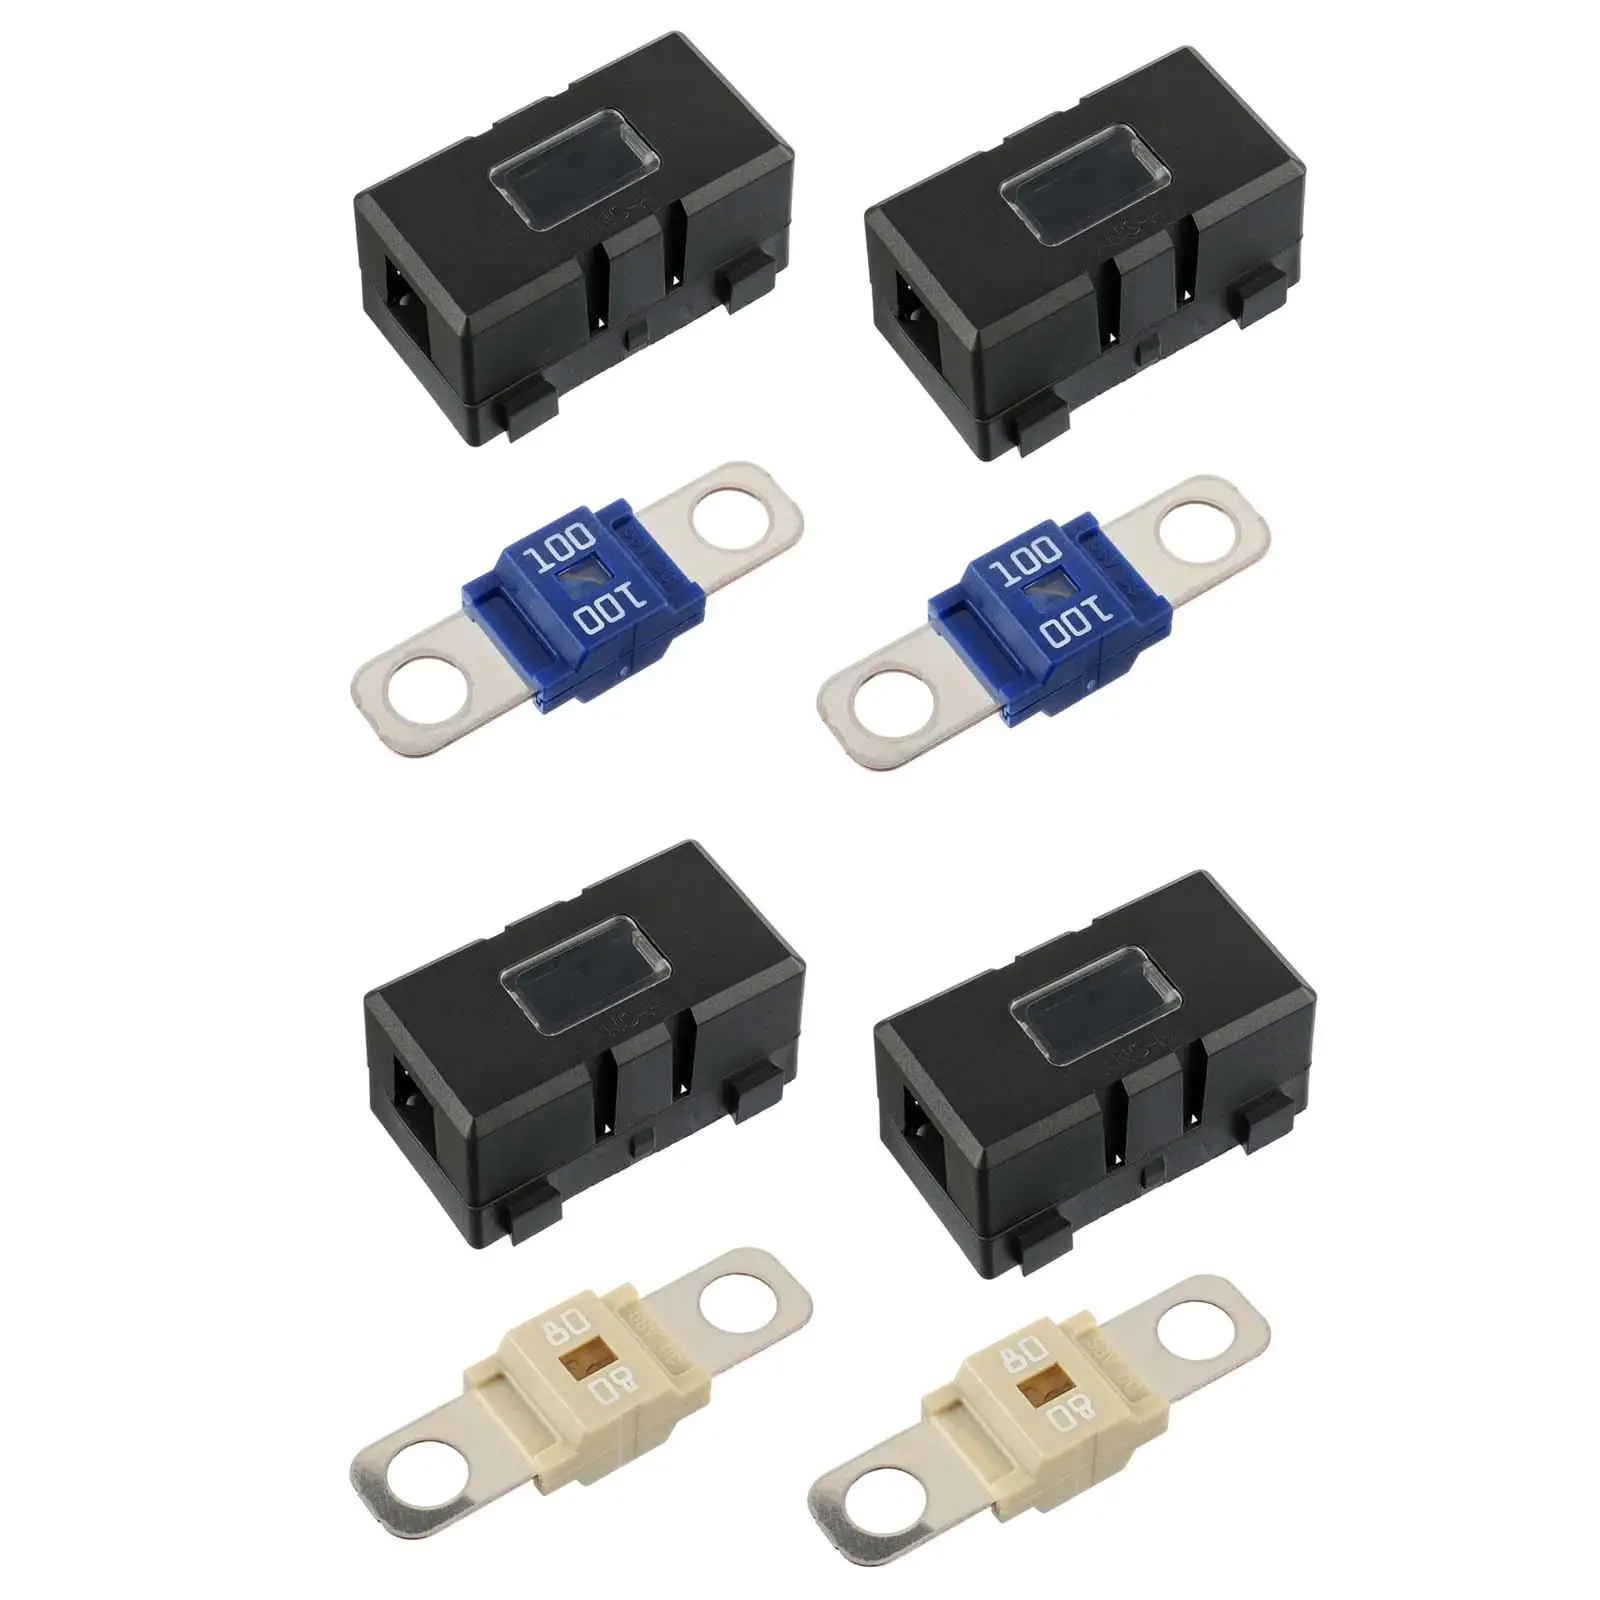 Multipurpose Car Fuse Holder with 2Pcs Fuses Waterproof ans Durable Fuse block for Trucks Cars Vehicles